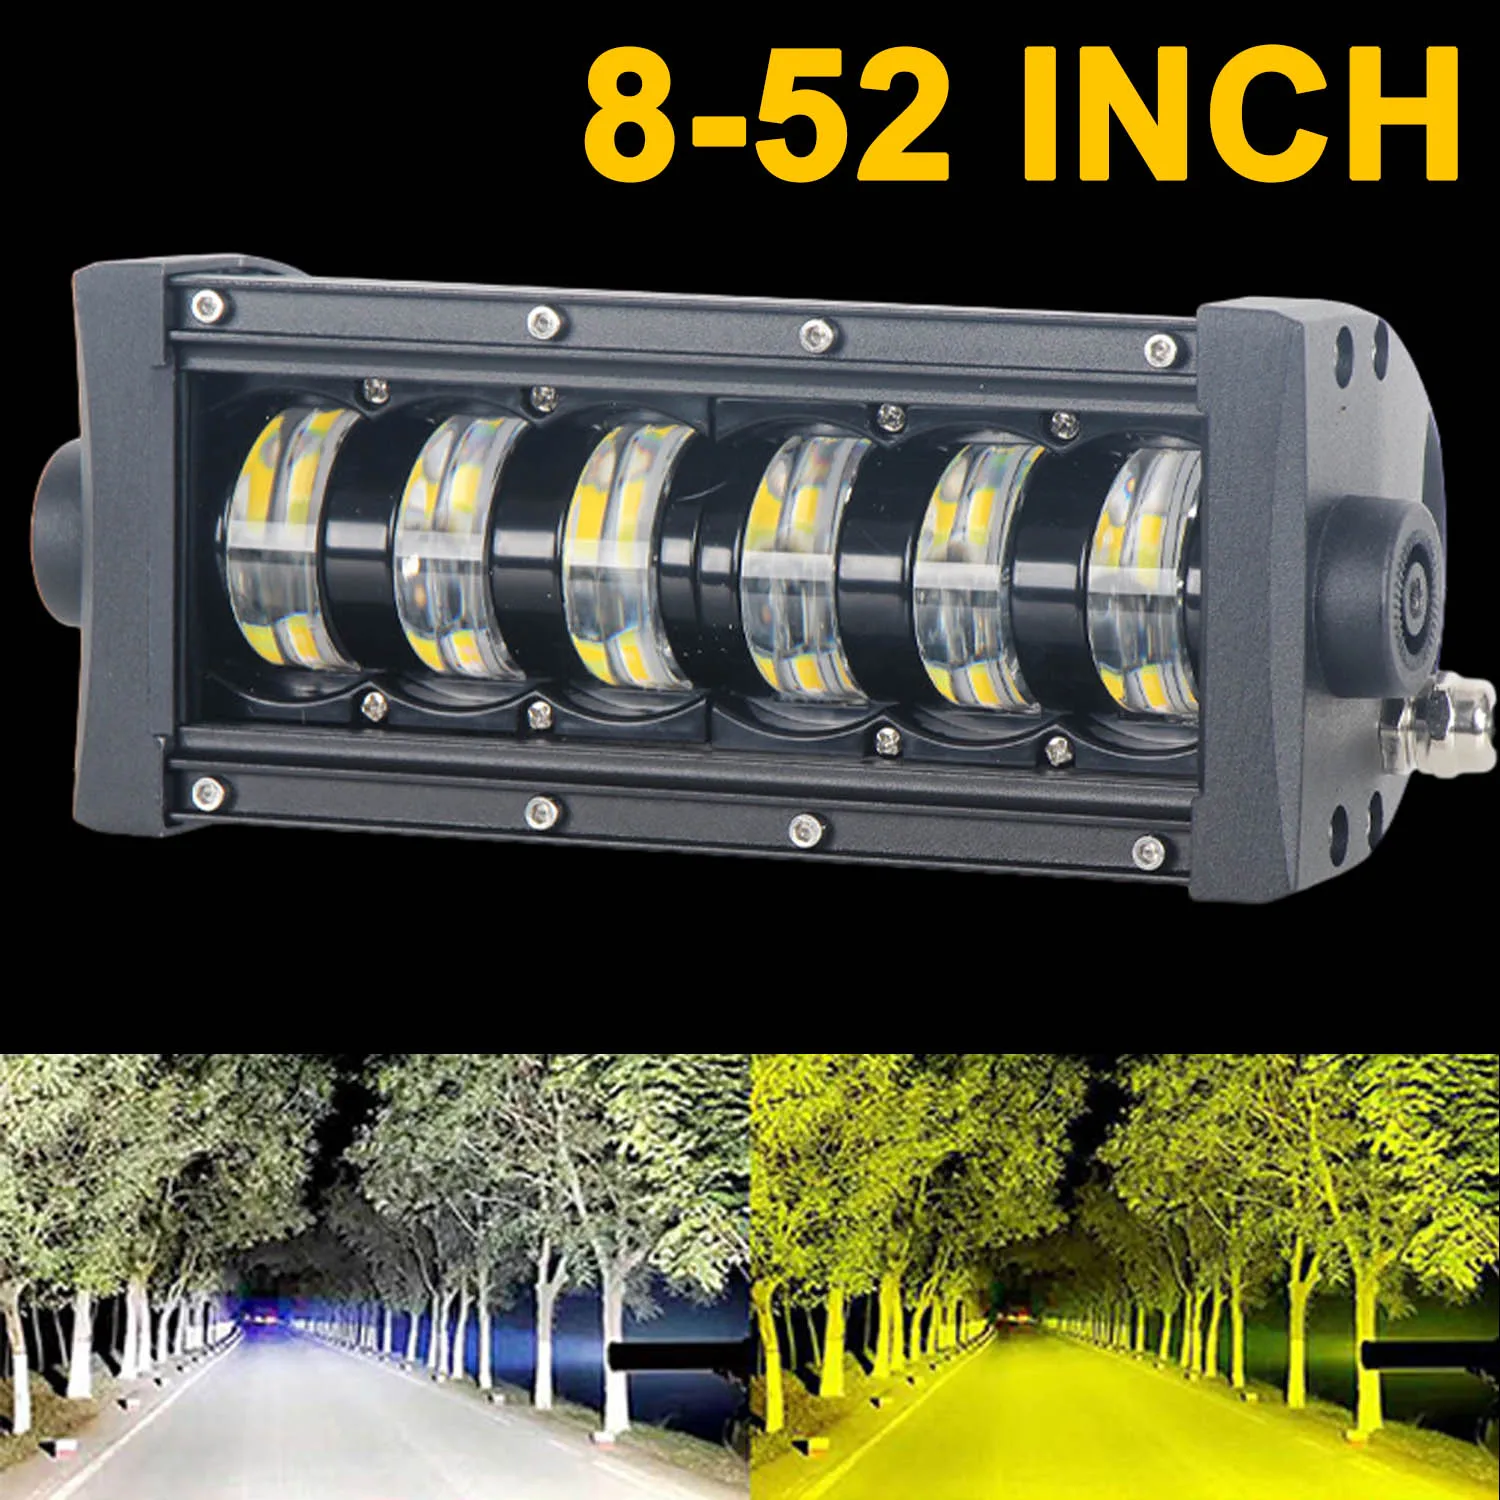 

8-52 inch LED Light Bar Amber White High Low Beam Heavy Duty Waterproof Driving Offroad Fog Lights Car Tractor Truck 4x4 SUV ATV